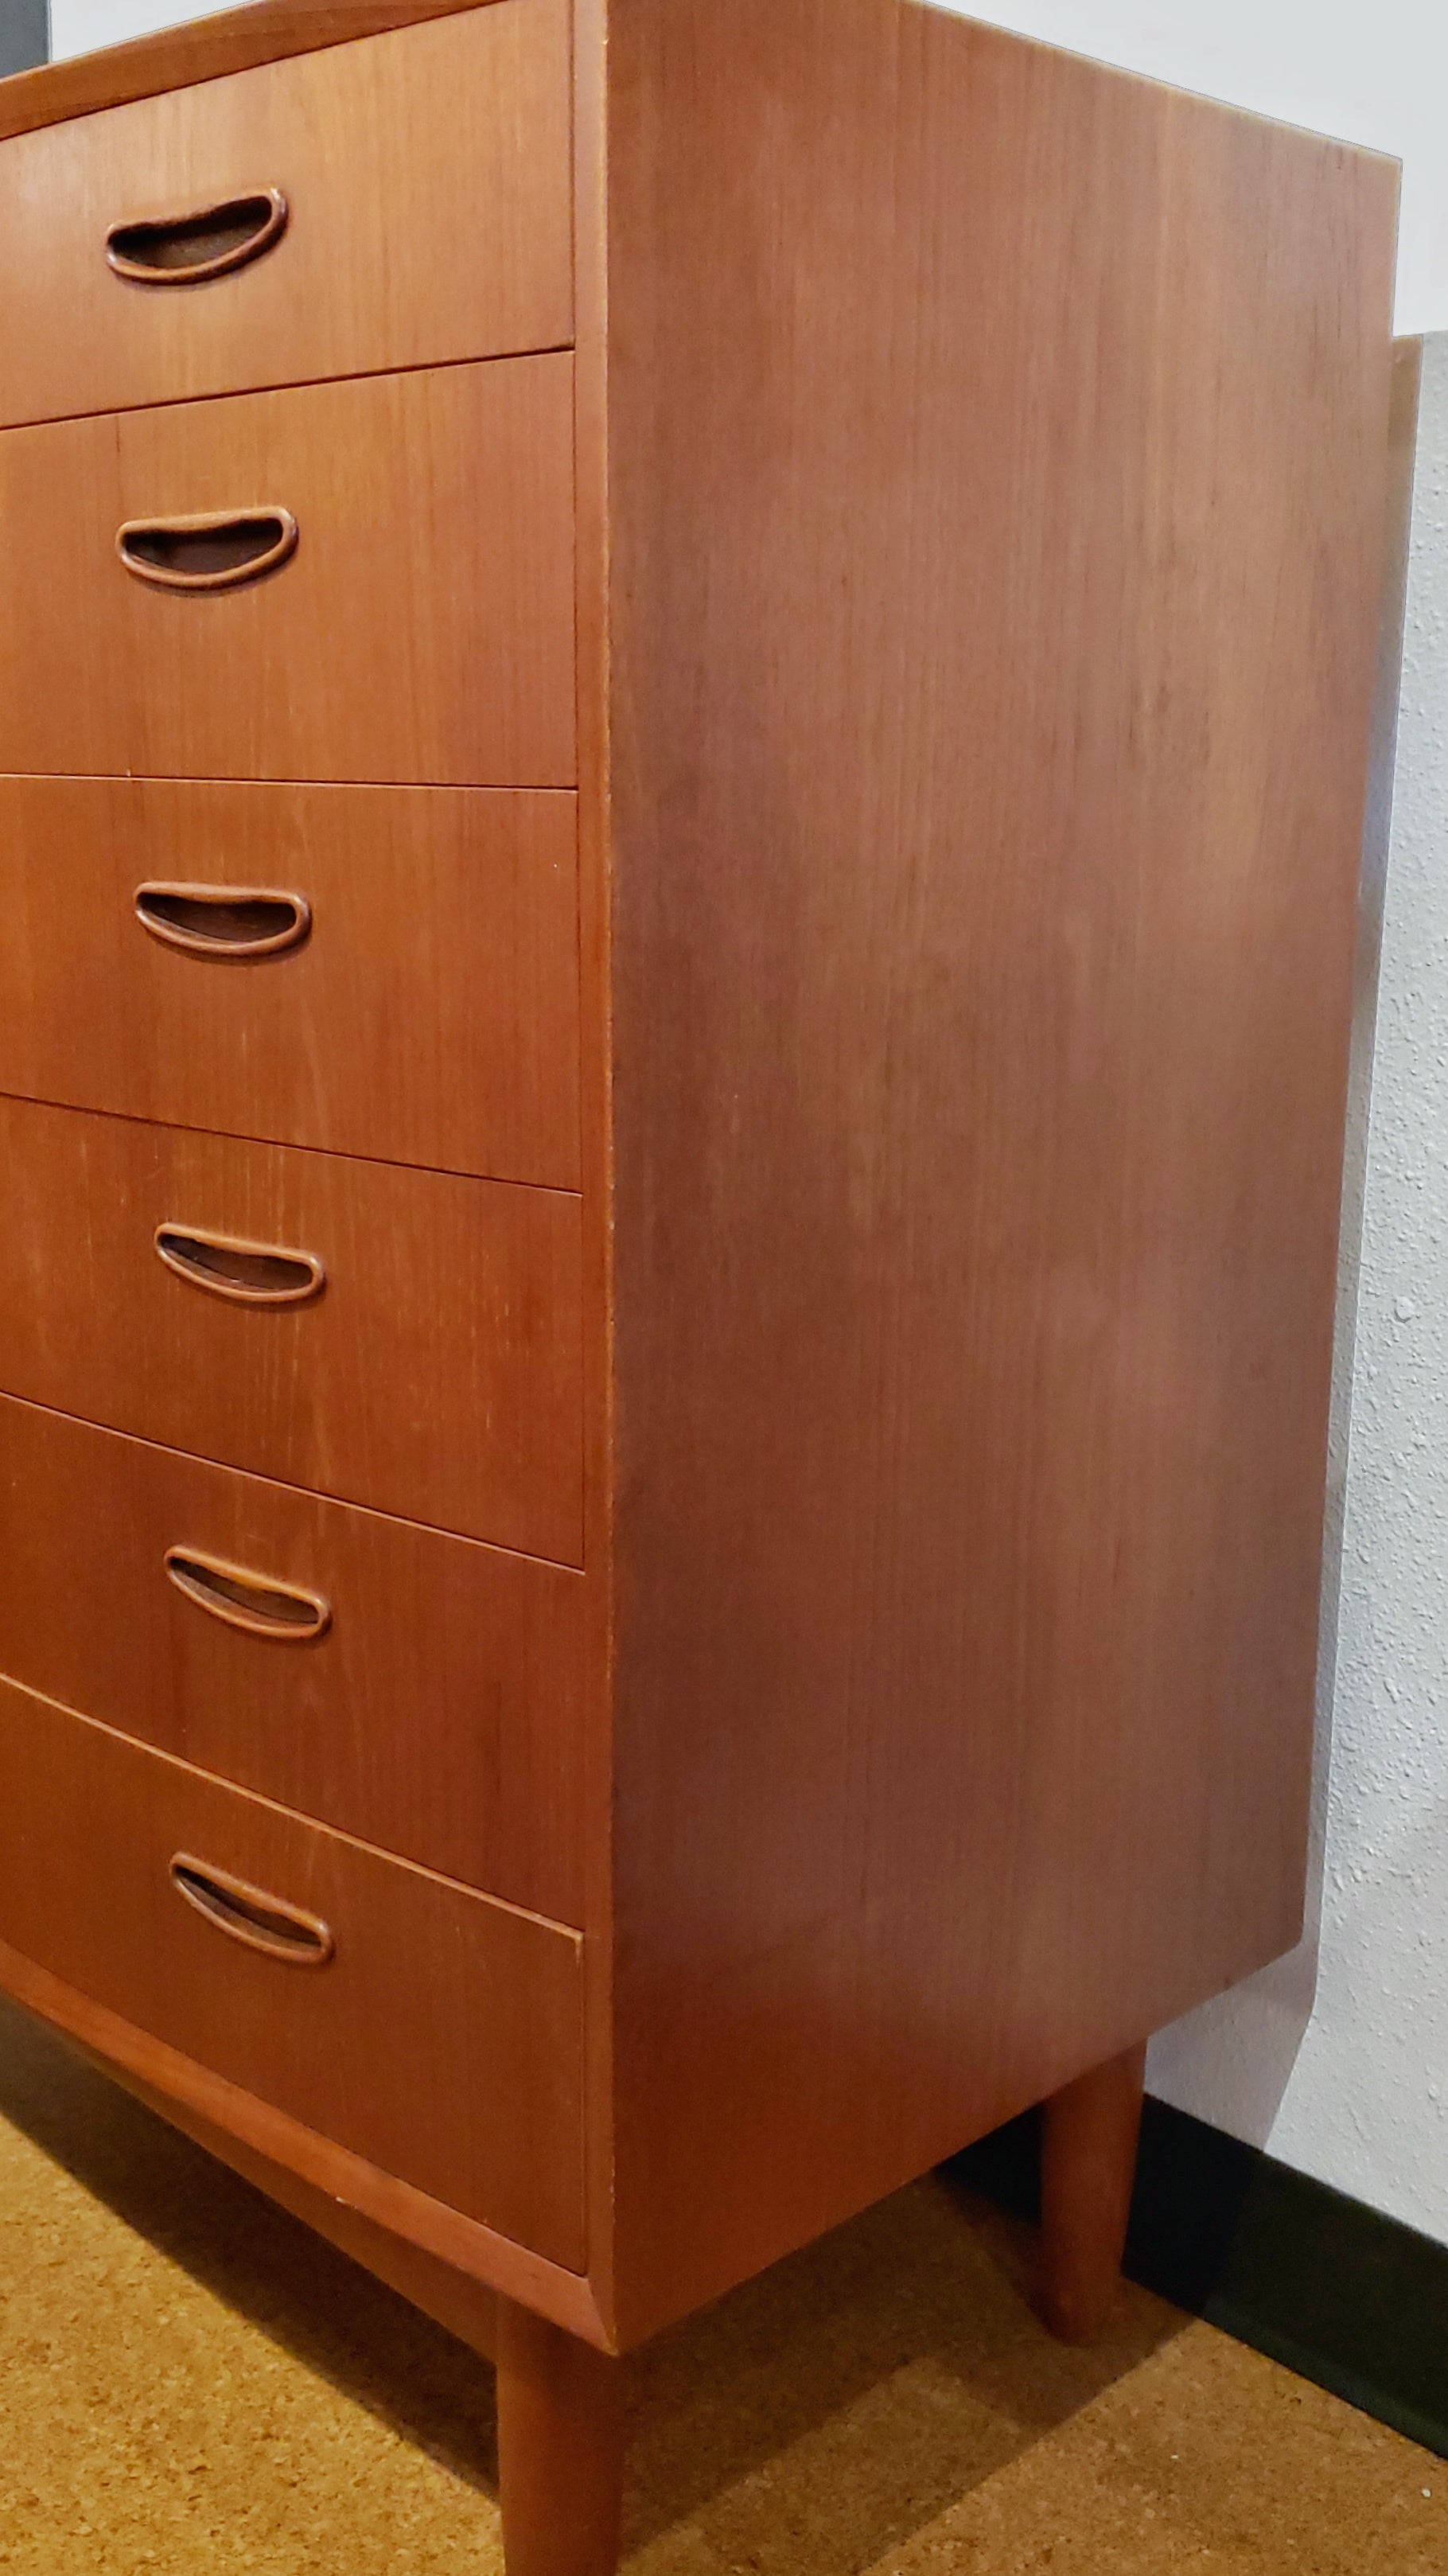 BOW-FRONT CHEST OF DRAWERS